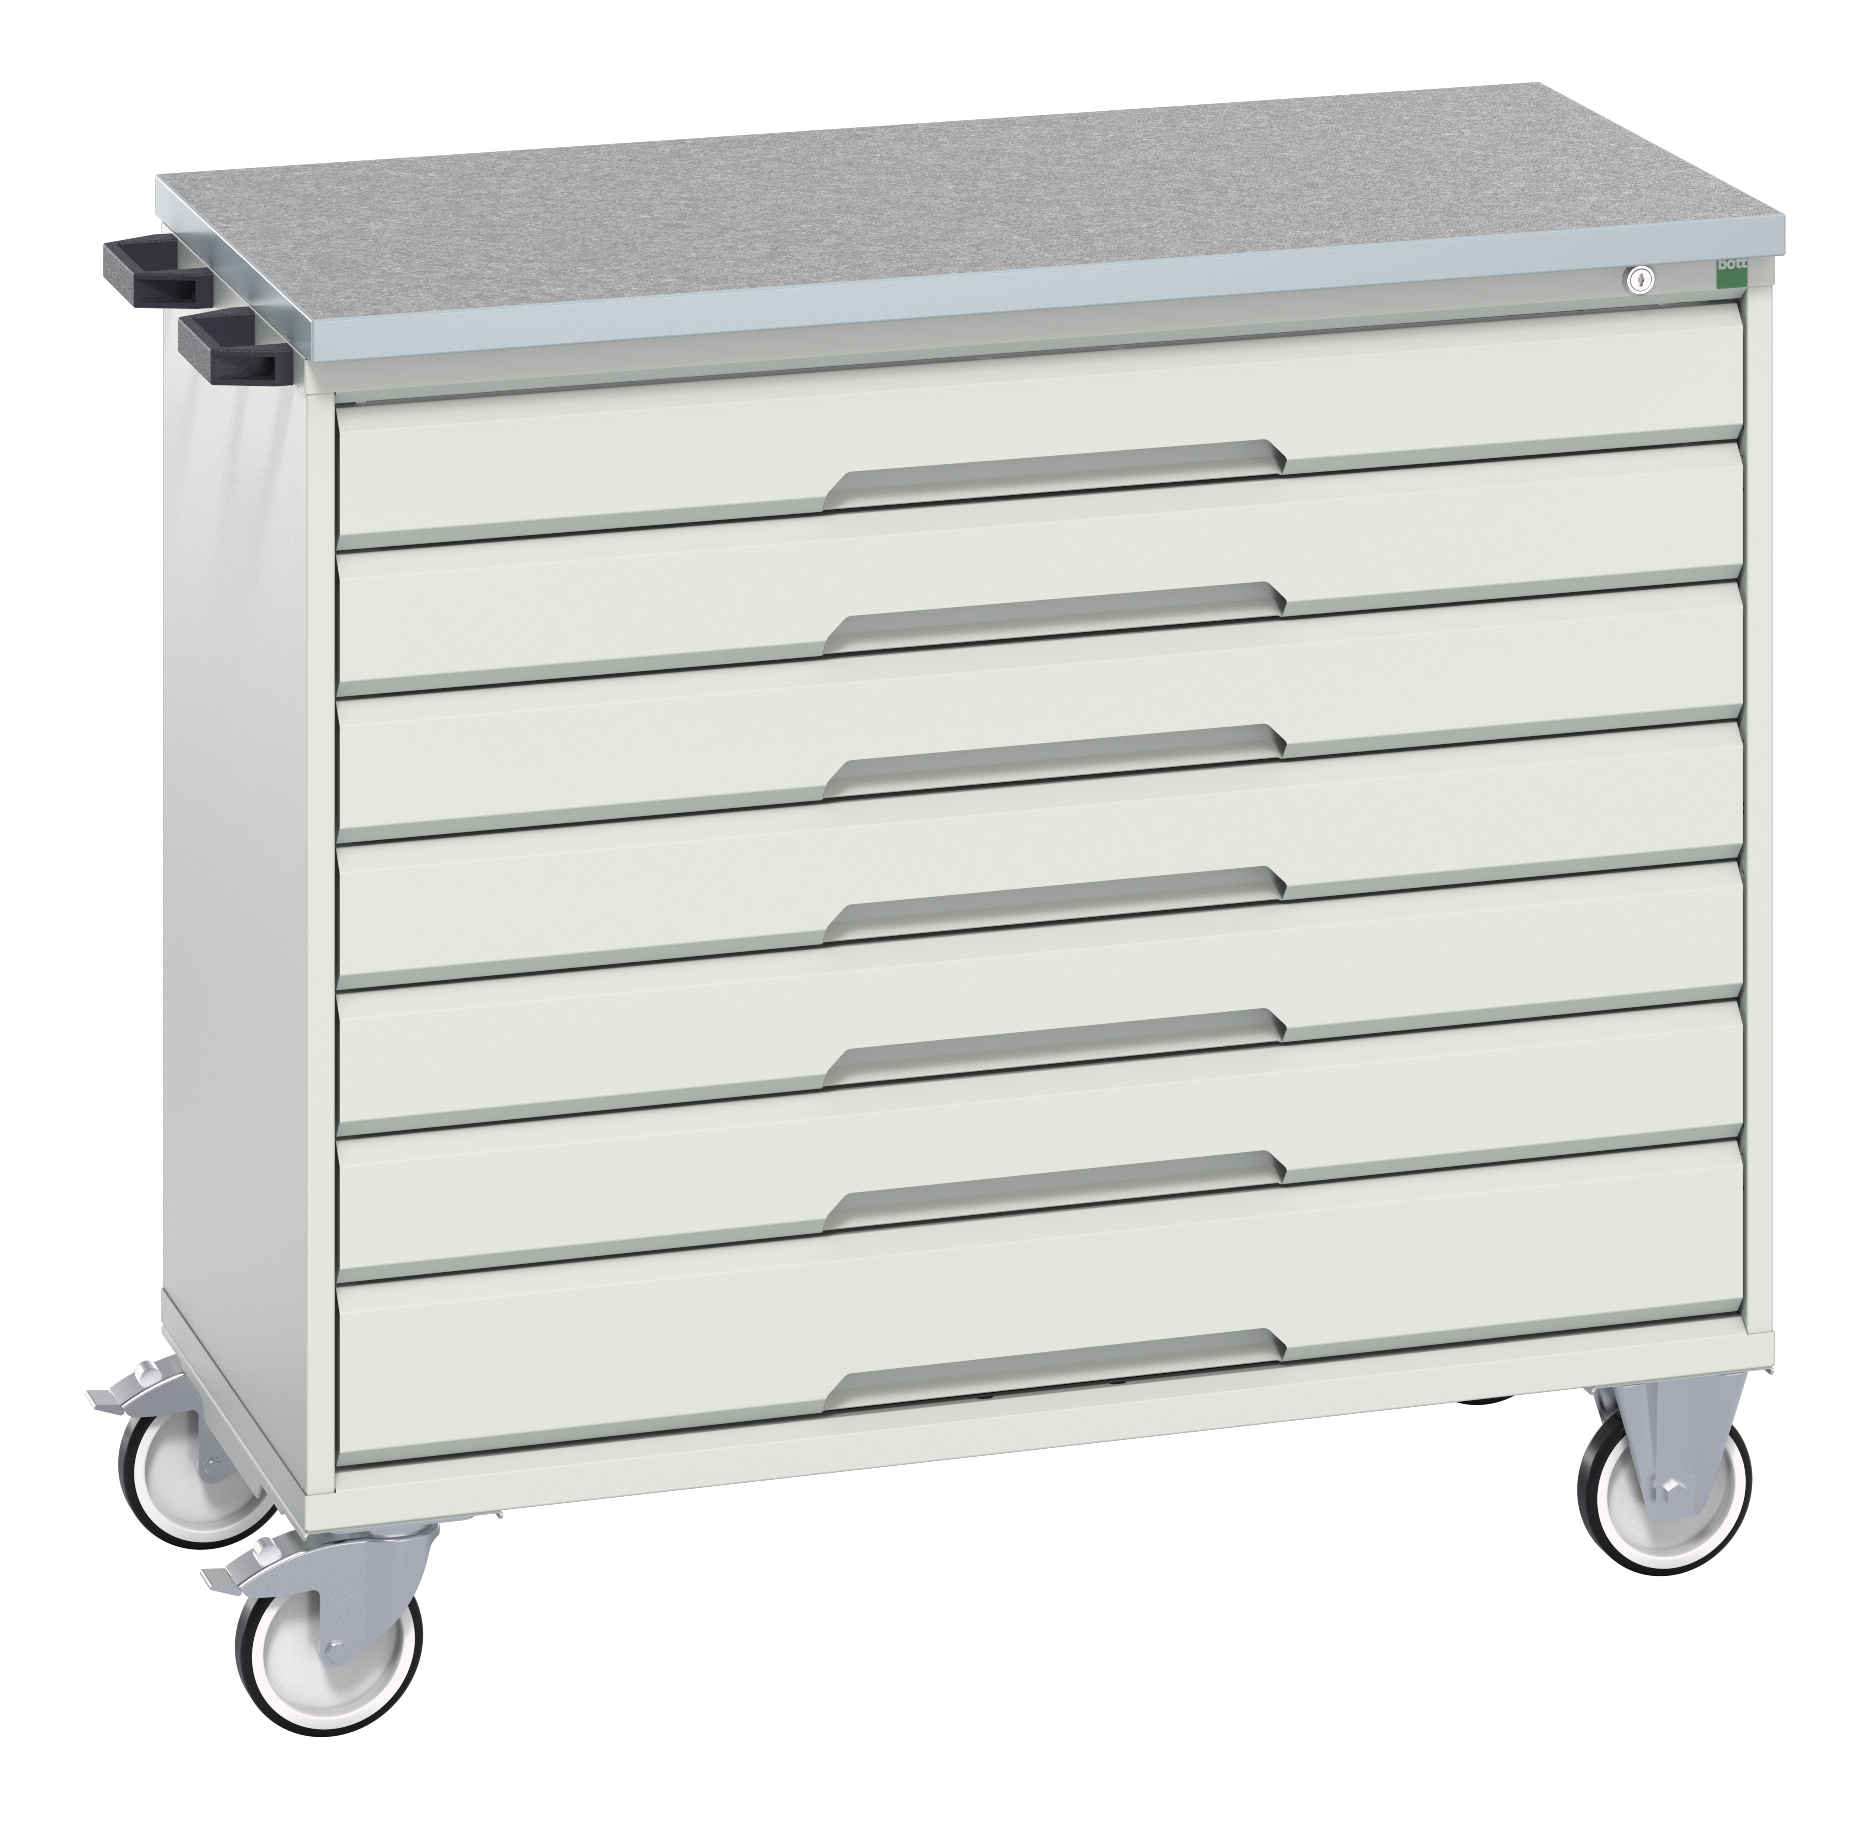 Bott Verso Mobile Drawer Cabinet With 7 Drawers & Lino Top - 16927056.16